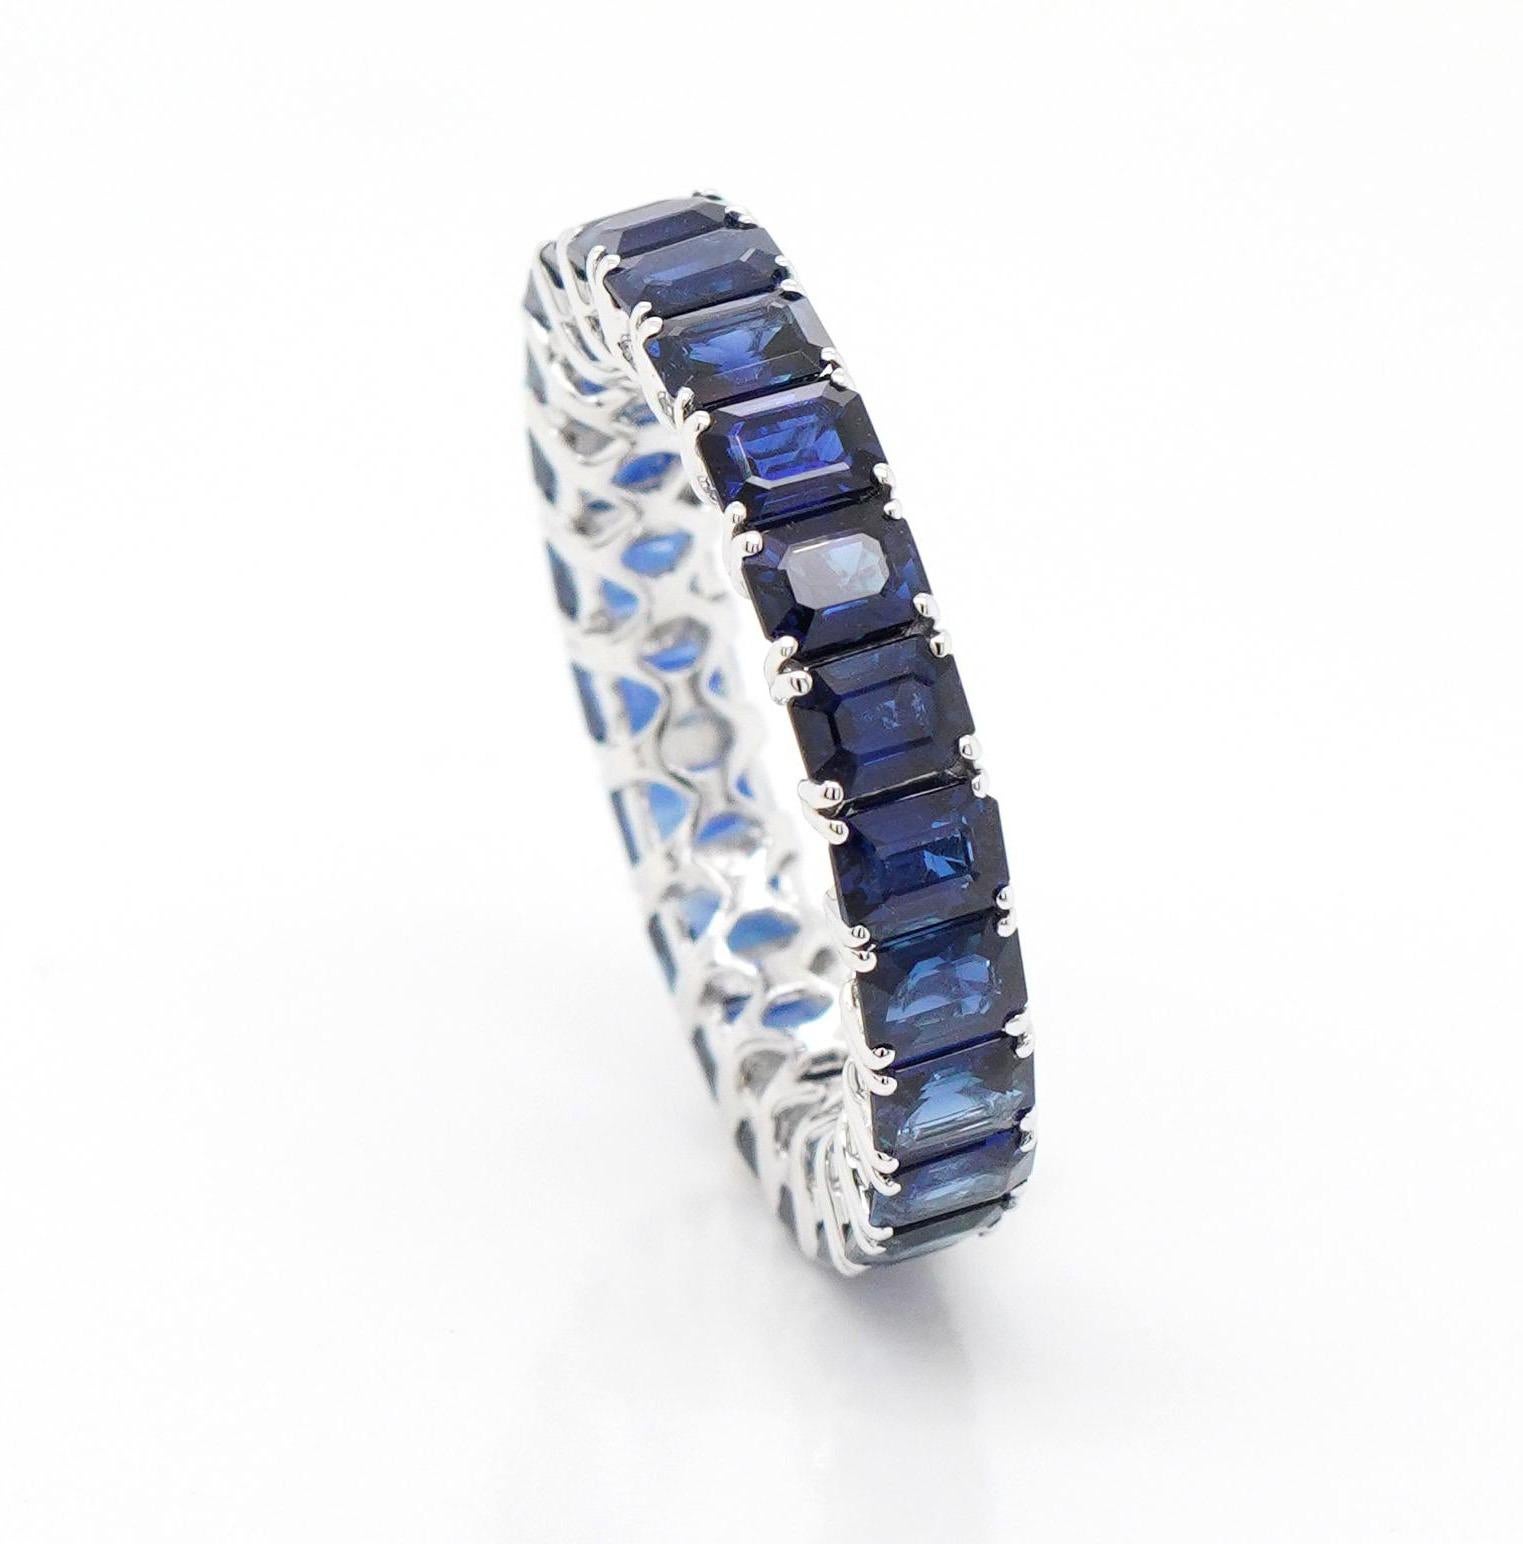 18K white gold with natural blue sapphire 5.94 carat 3.62 grams